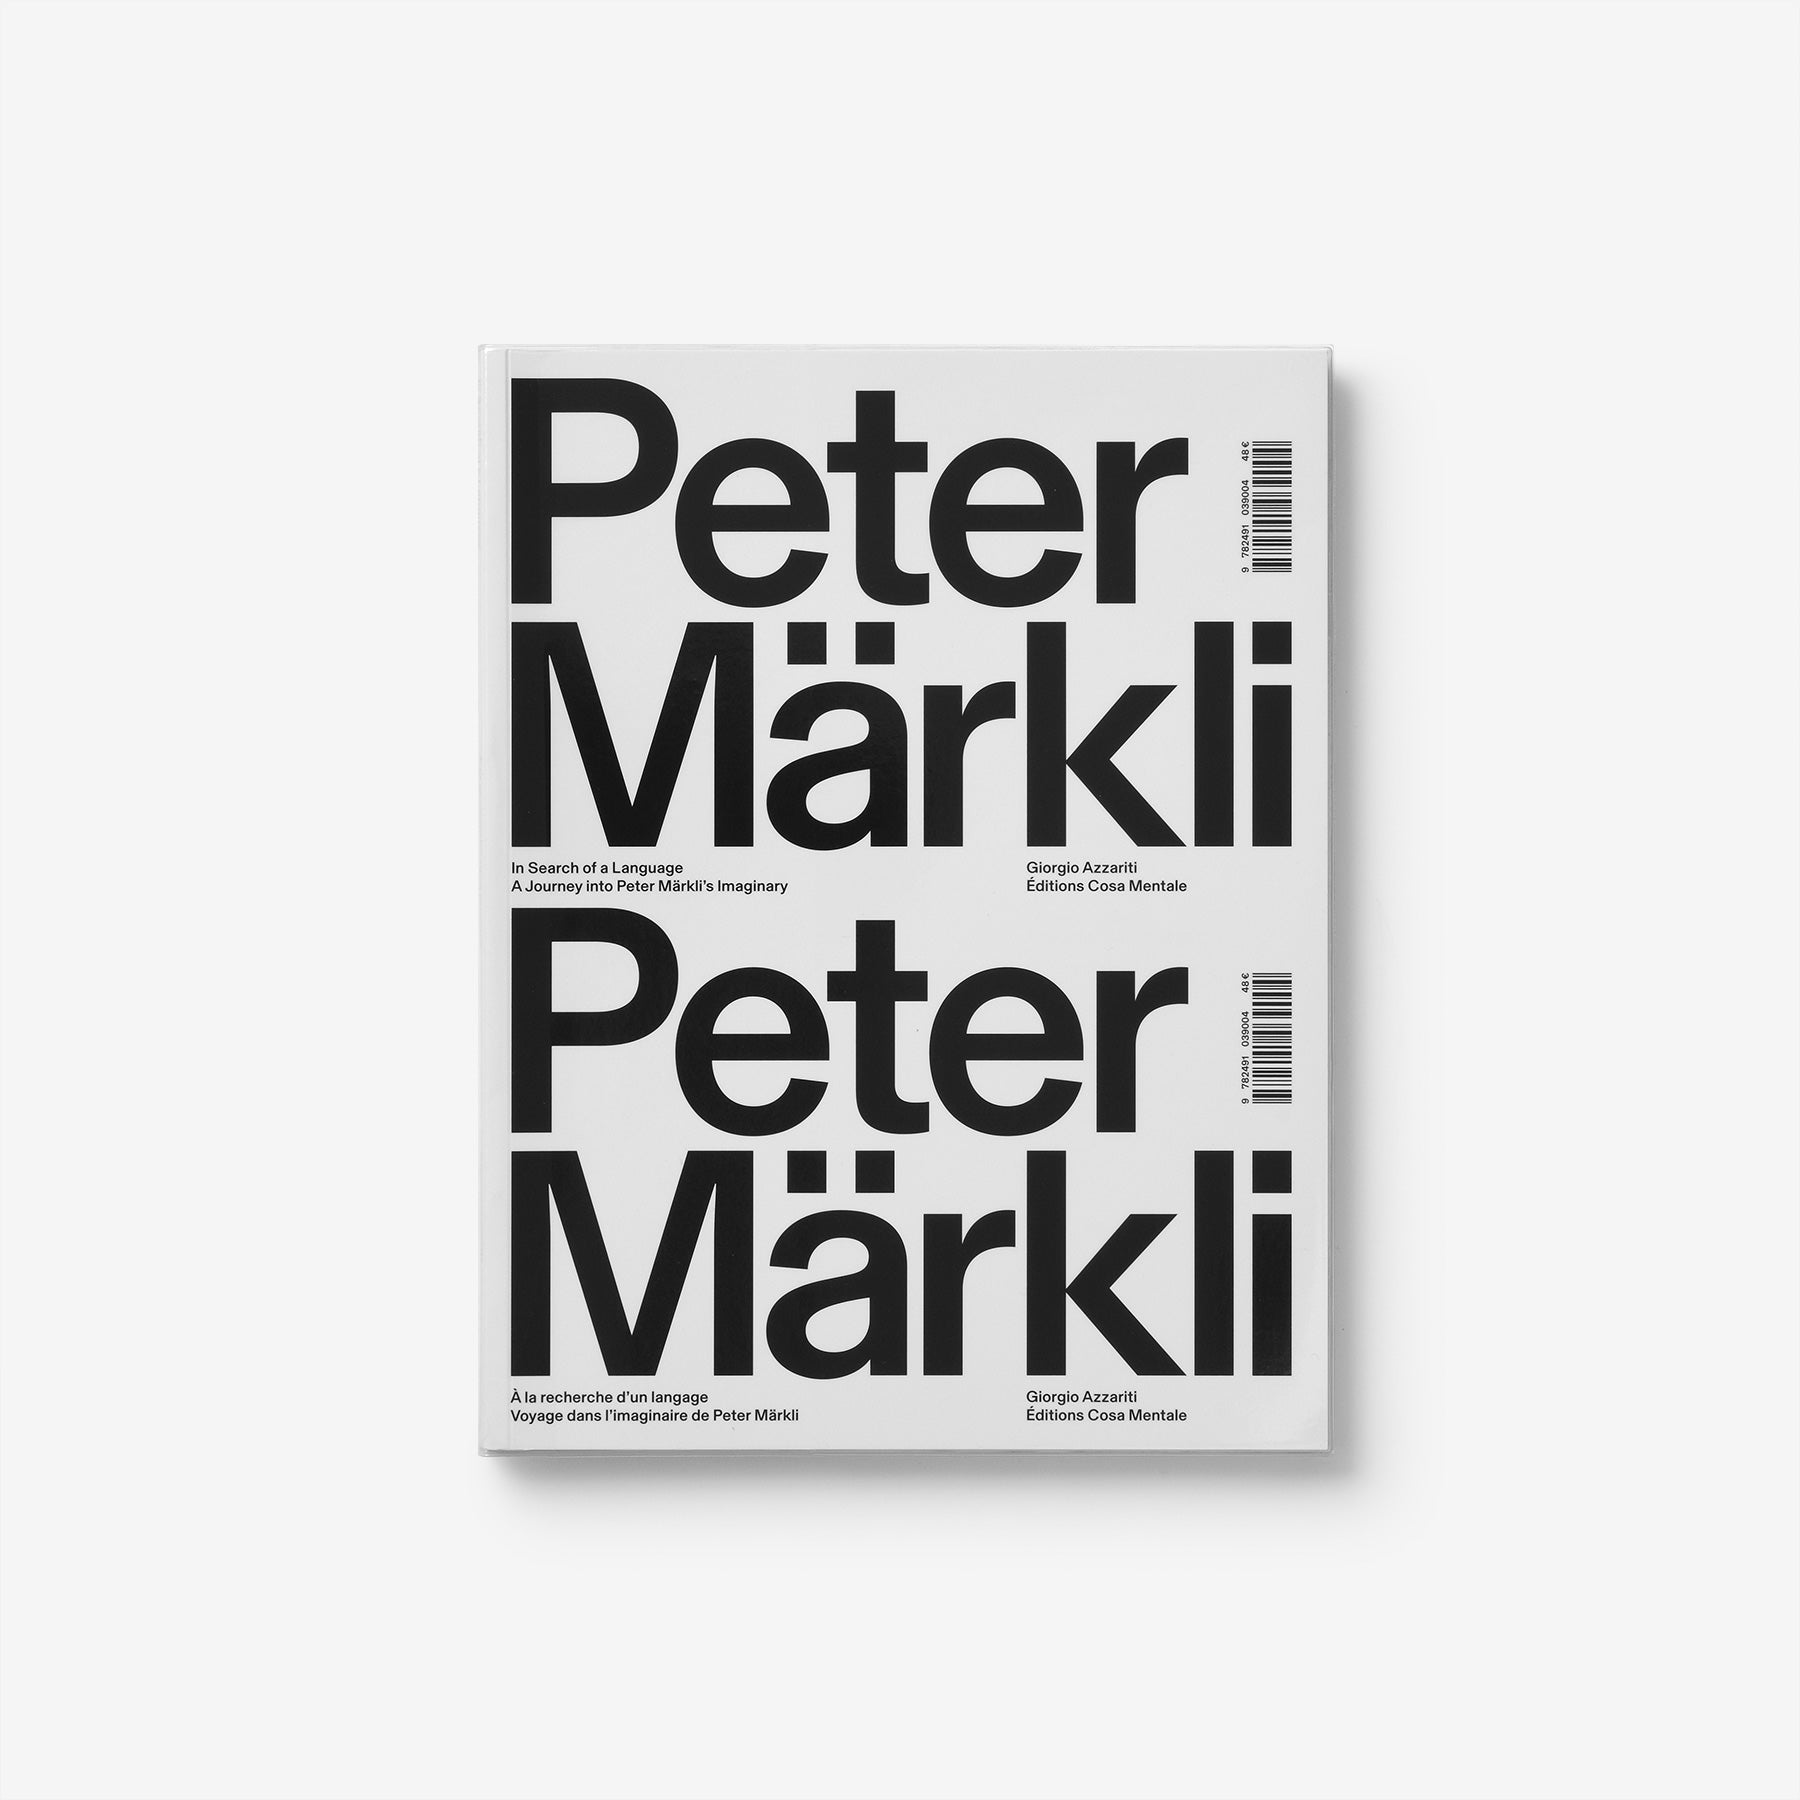 In Search of a Language. A Journey into Peter Märkli’s Imaginary.